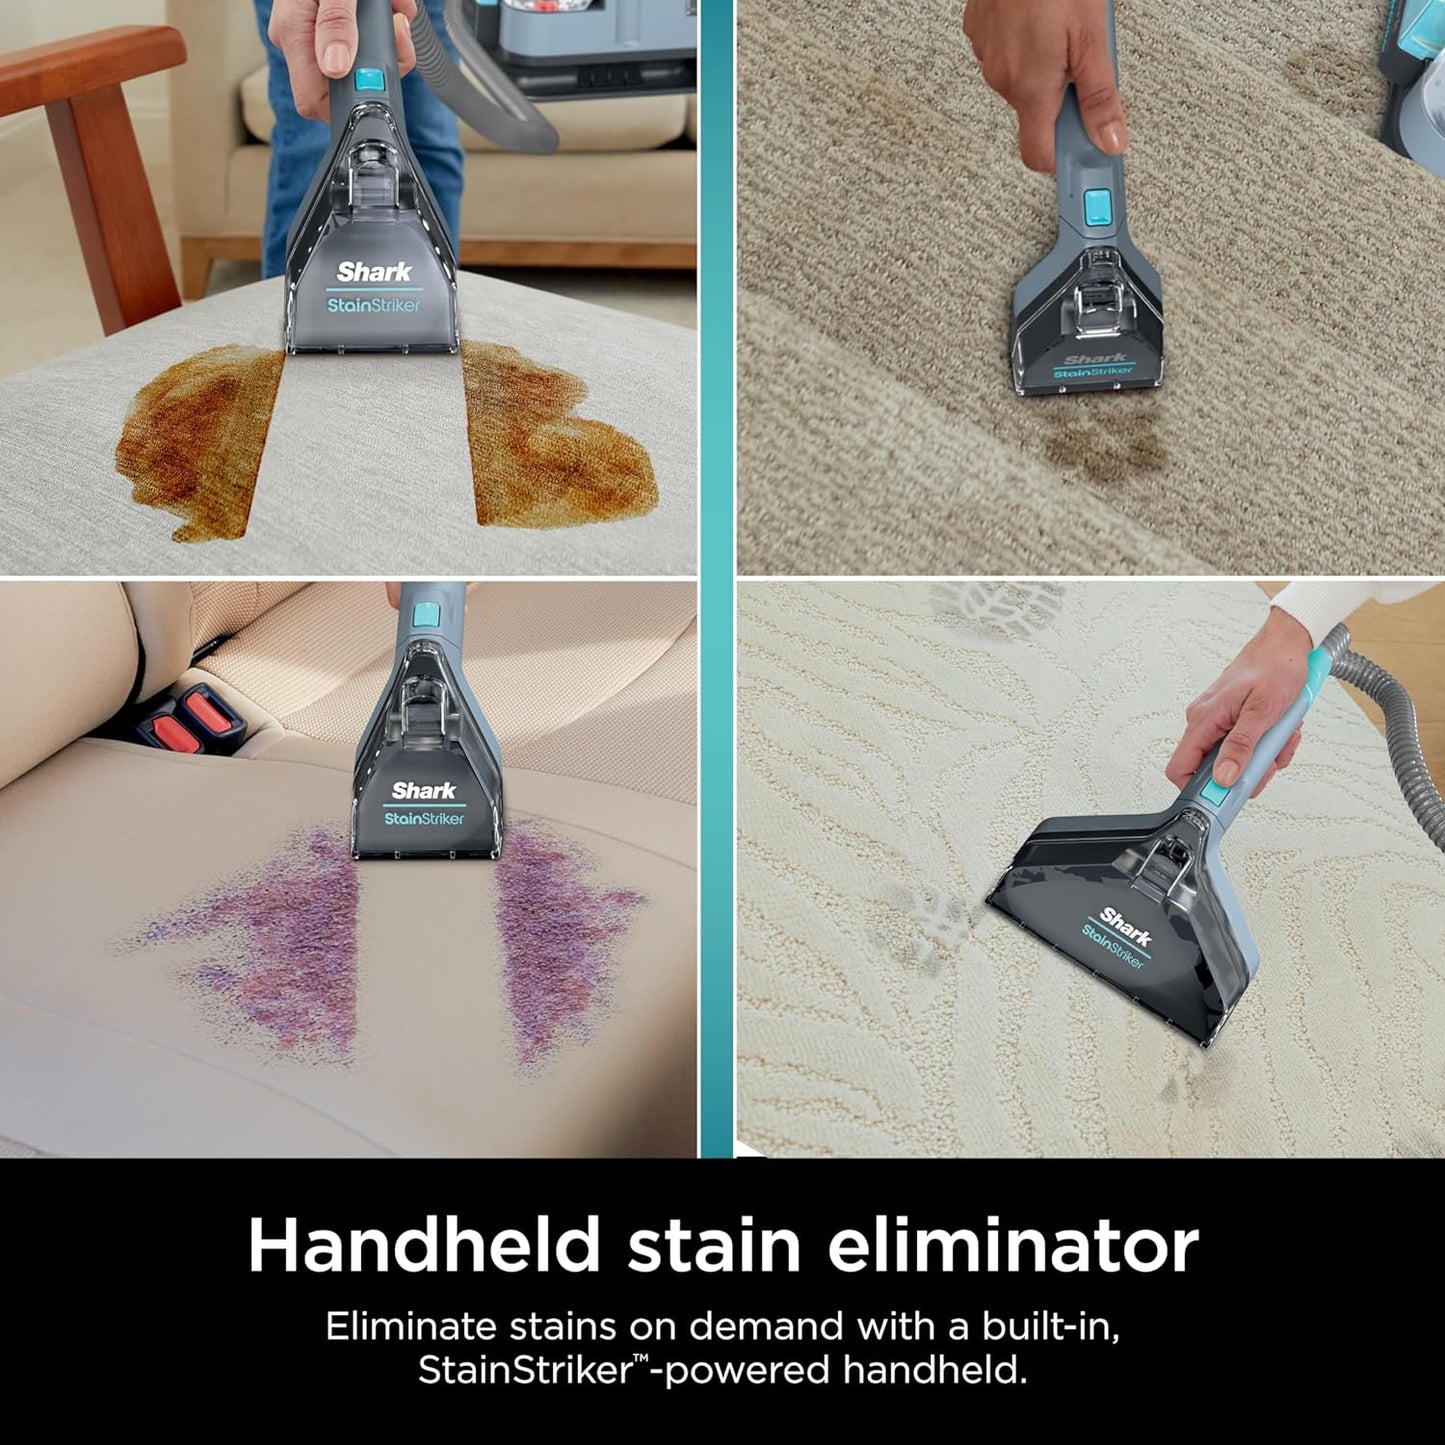 Shark StainStriker Portable Spot, Stain, & Odor Eliminator for Carpets, Area Rugs, Upholstery, Cars, with Bonus Accessories and Cleaning Solutions, Perfect for Pets, Nordic Blue